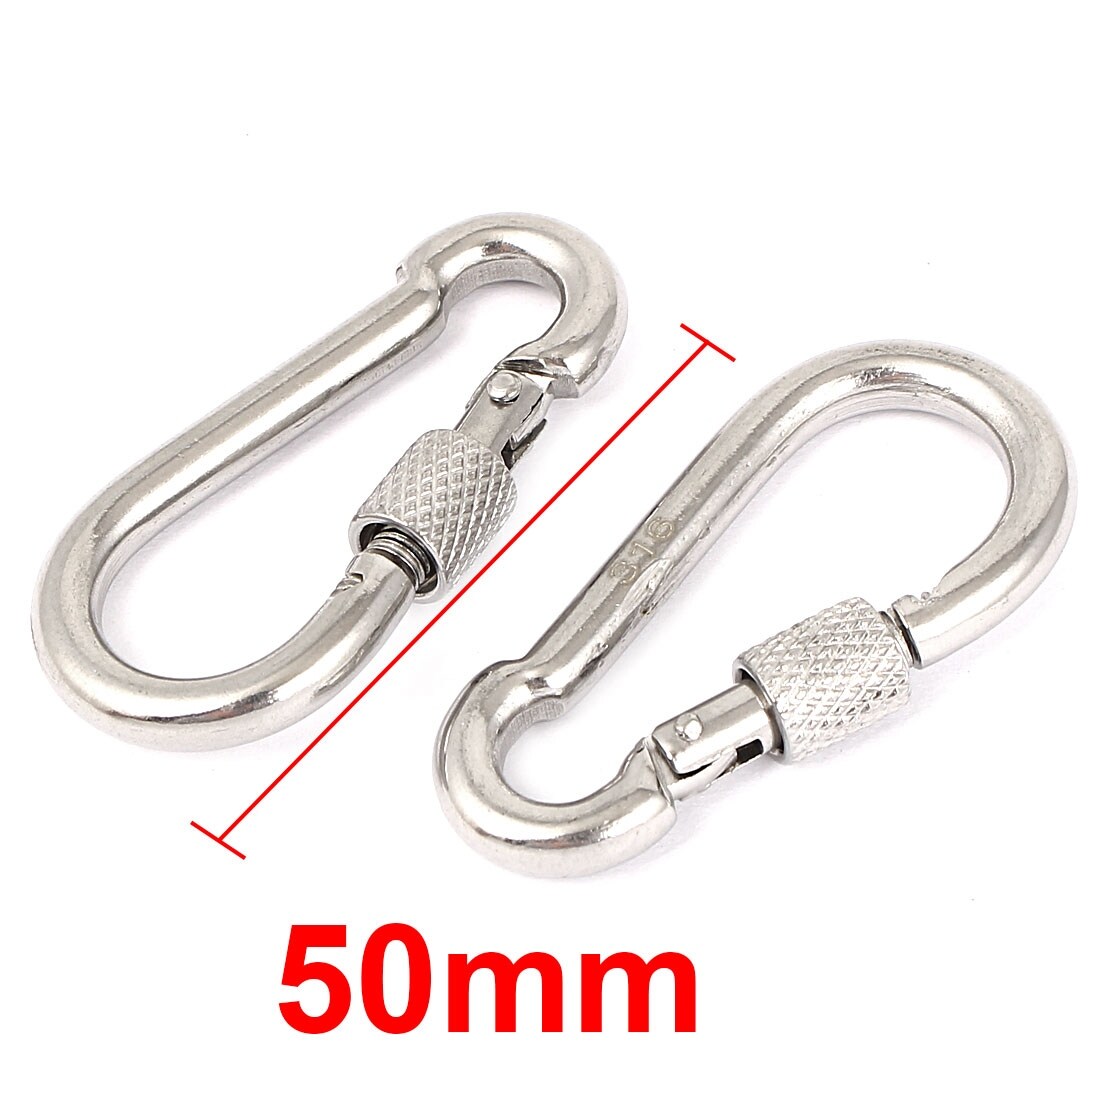 Carabiner Snap Hook with Eye and Screw Lock